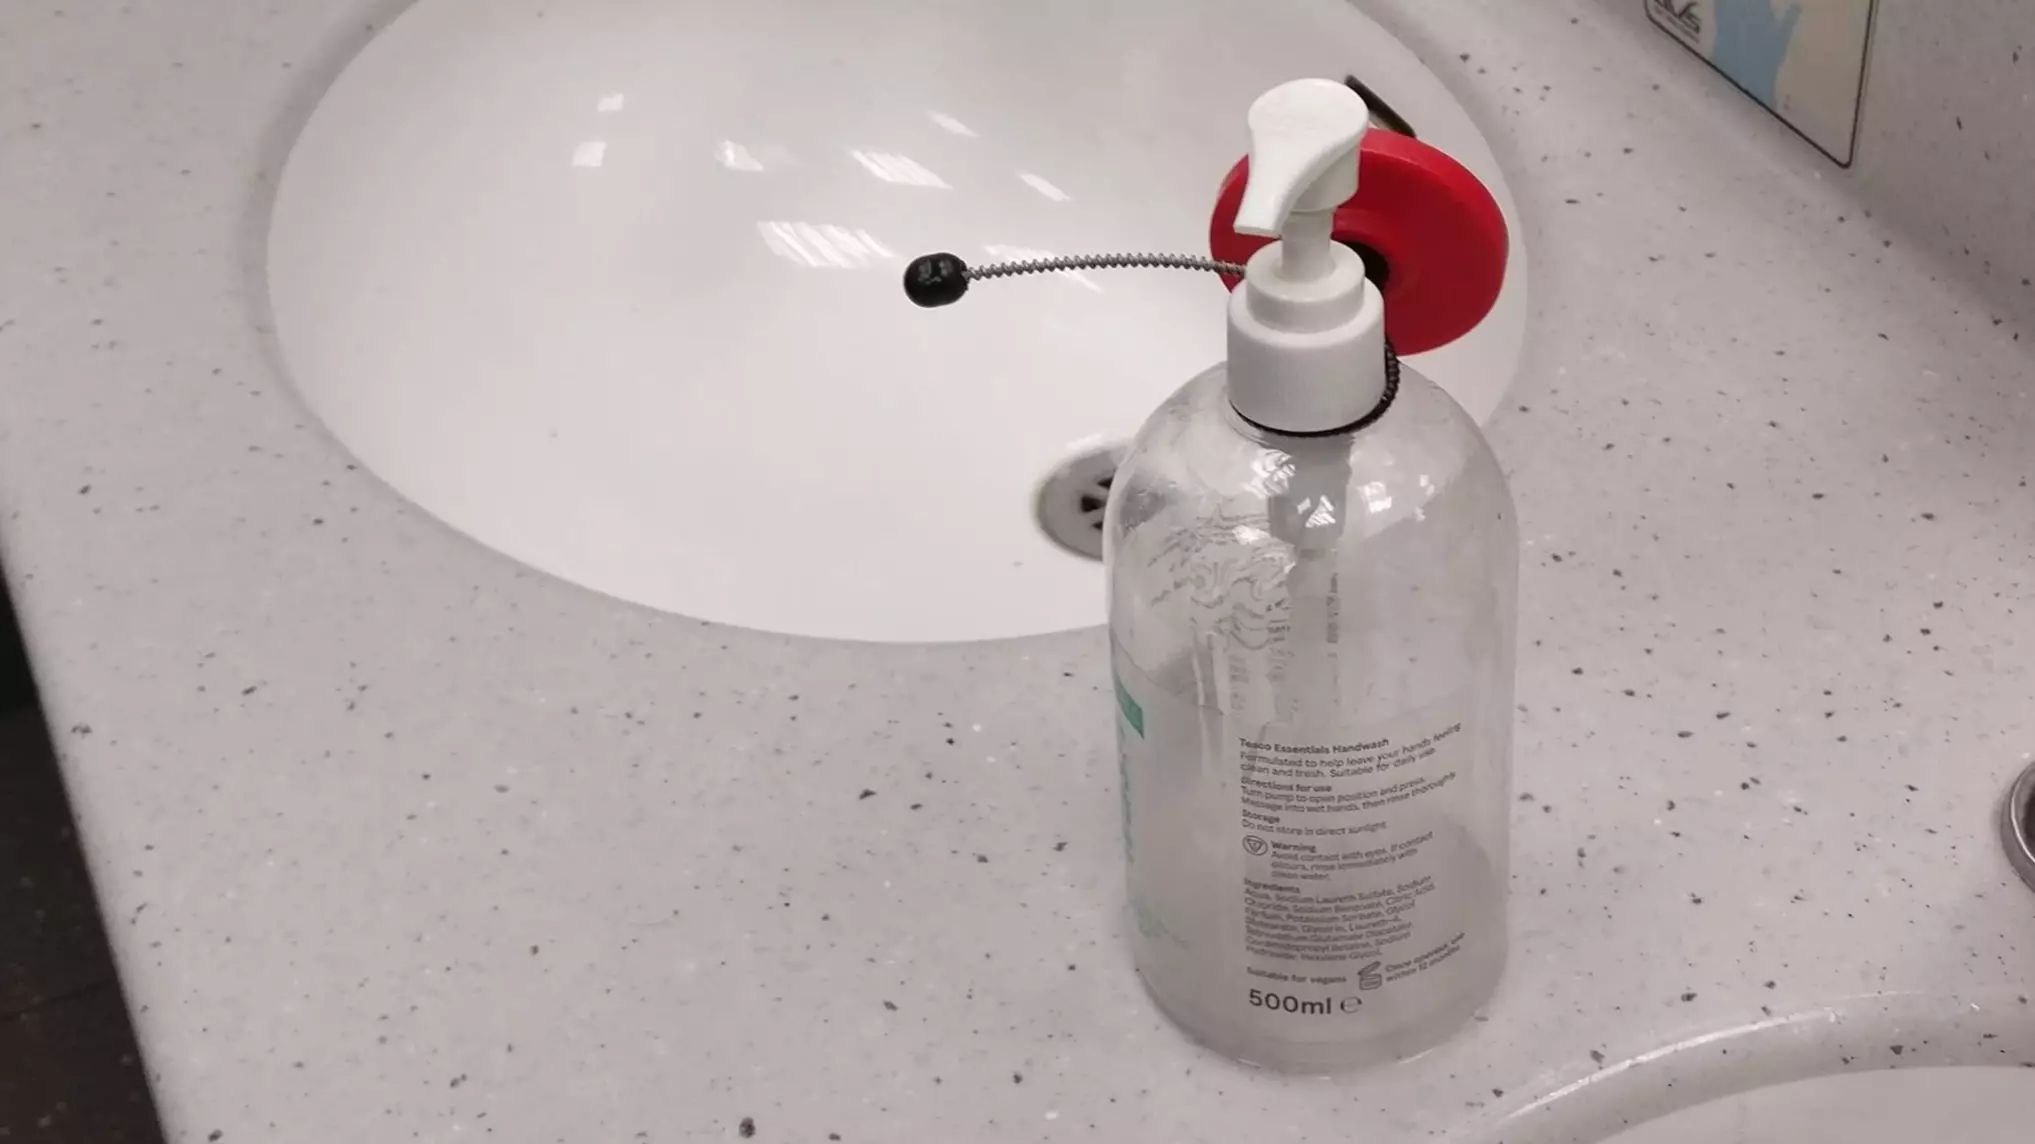 Tesco Store Puts Security Tags On Bathroom Soap In Store Toilets